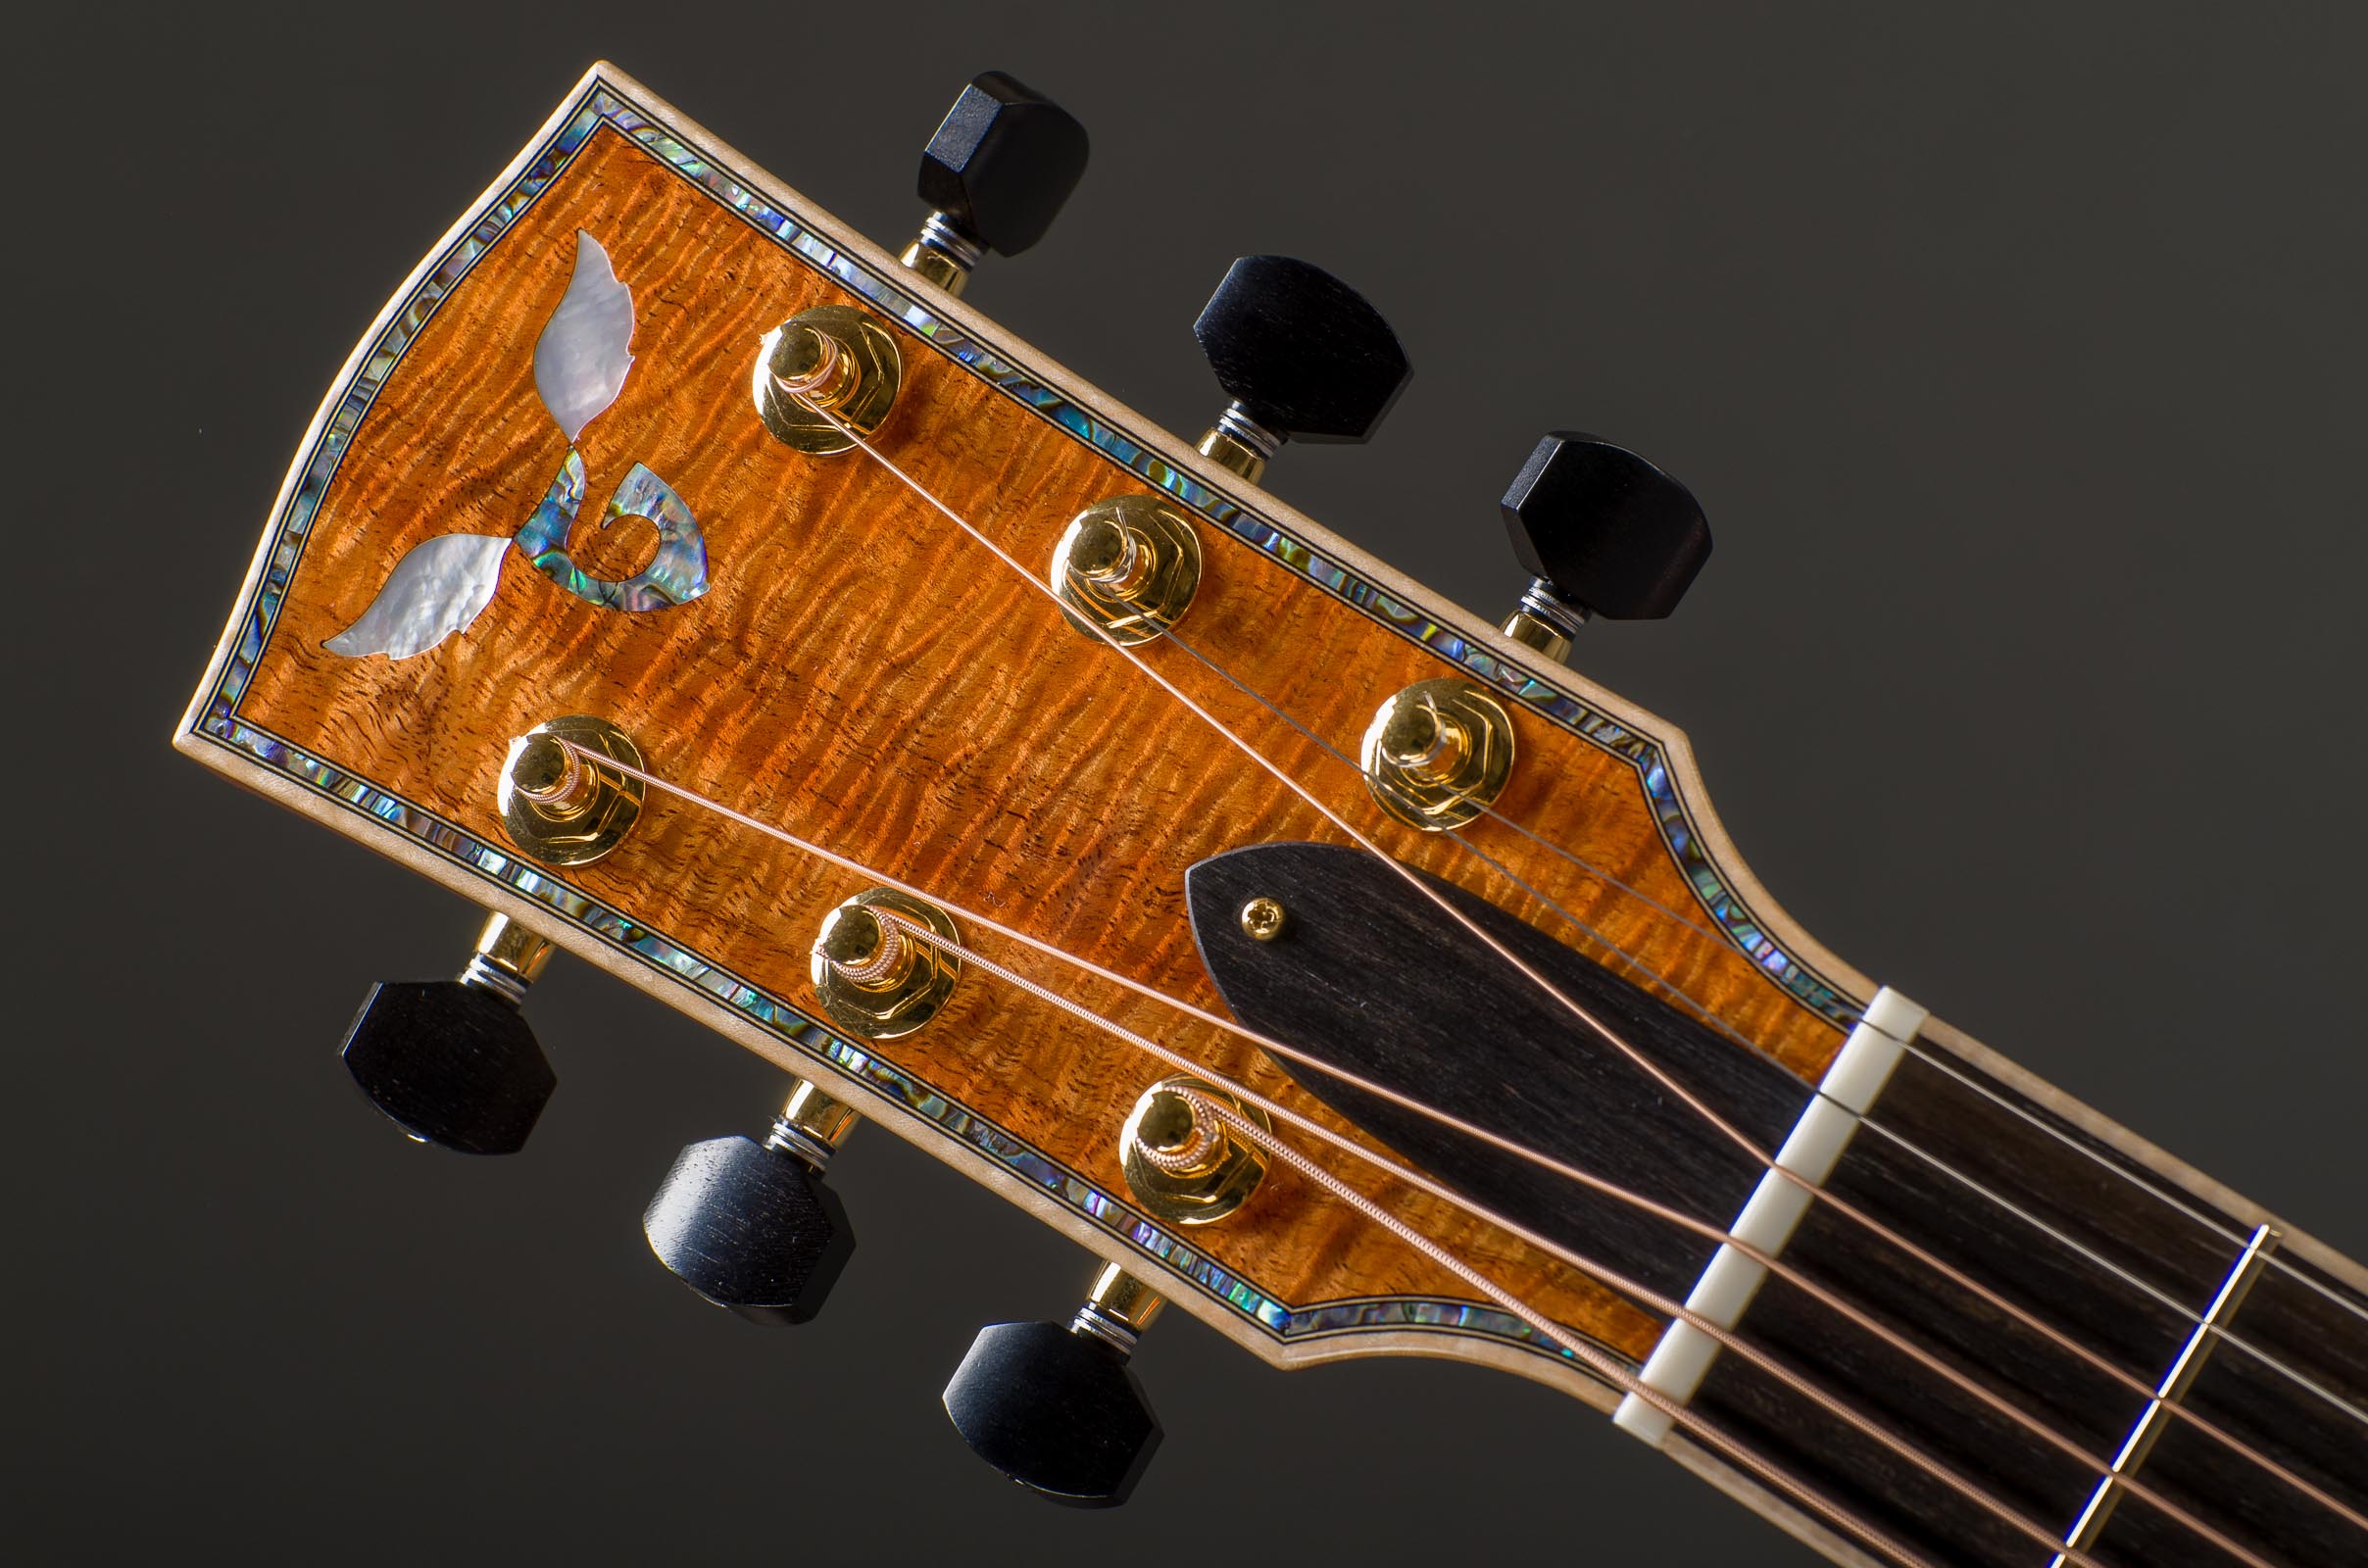 Customized "Signature" Series Styling 14-Fret Parlor Size Peghead - Figured Hawaiian Koa Veneer, Fancy Paua G - MOP Wings, & Curly Maple Binding - Including Matching Fretboard Option, Fancy Paua Peghead Border Inlay Option, Gold Gotoh 510 Mini Tuners with Ebony Buttons